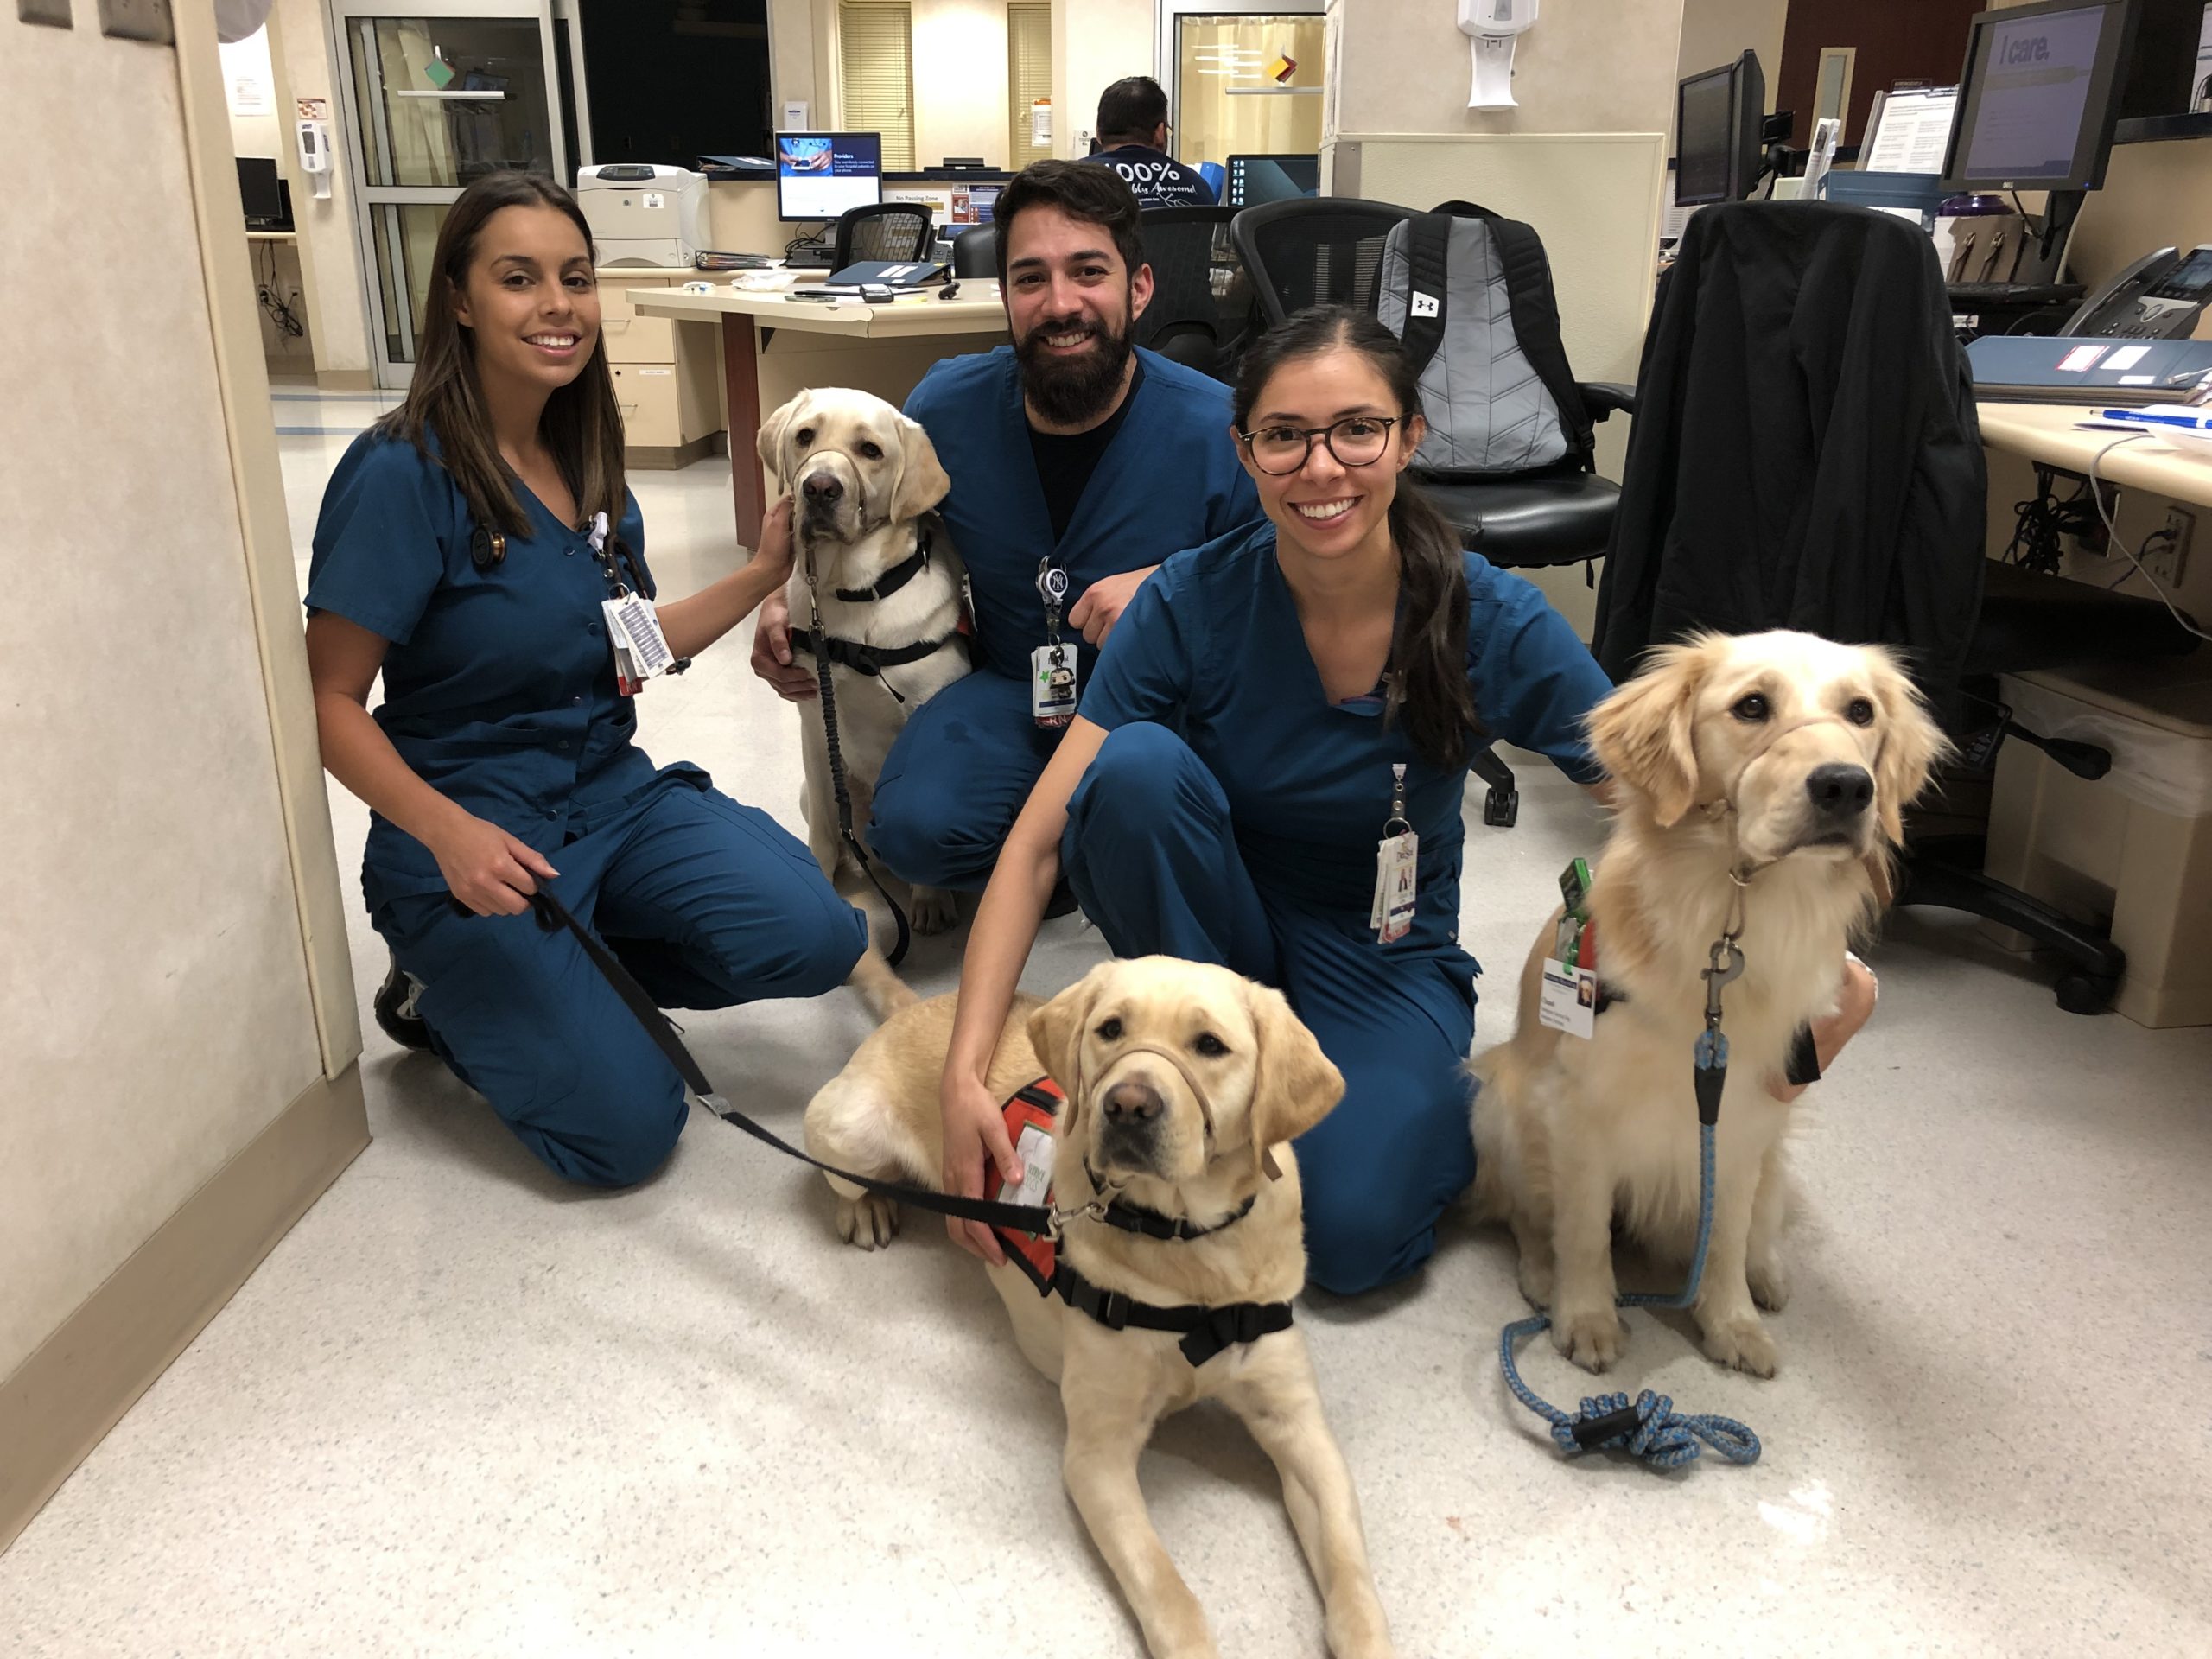 Three dogs comforting hospital workers